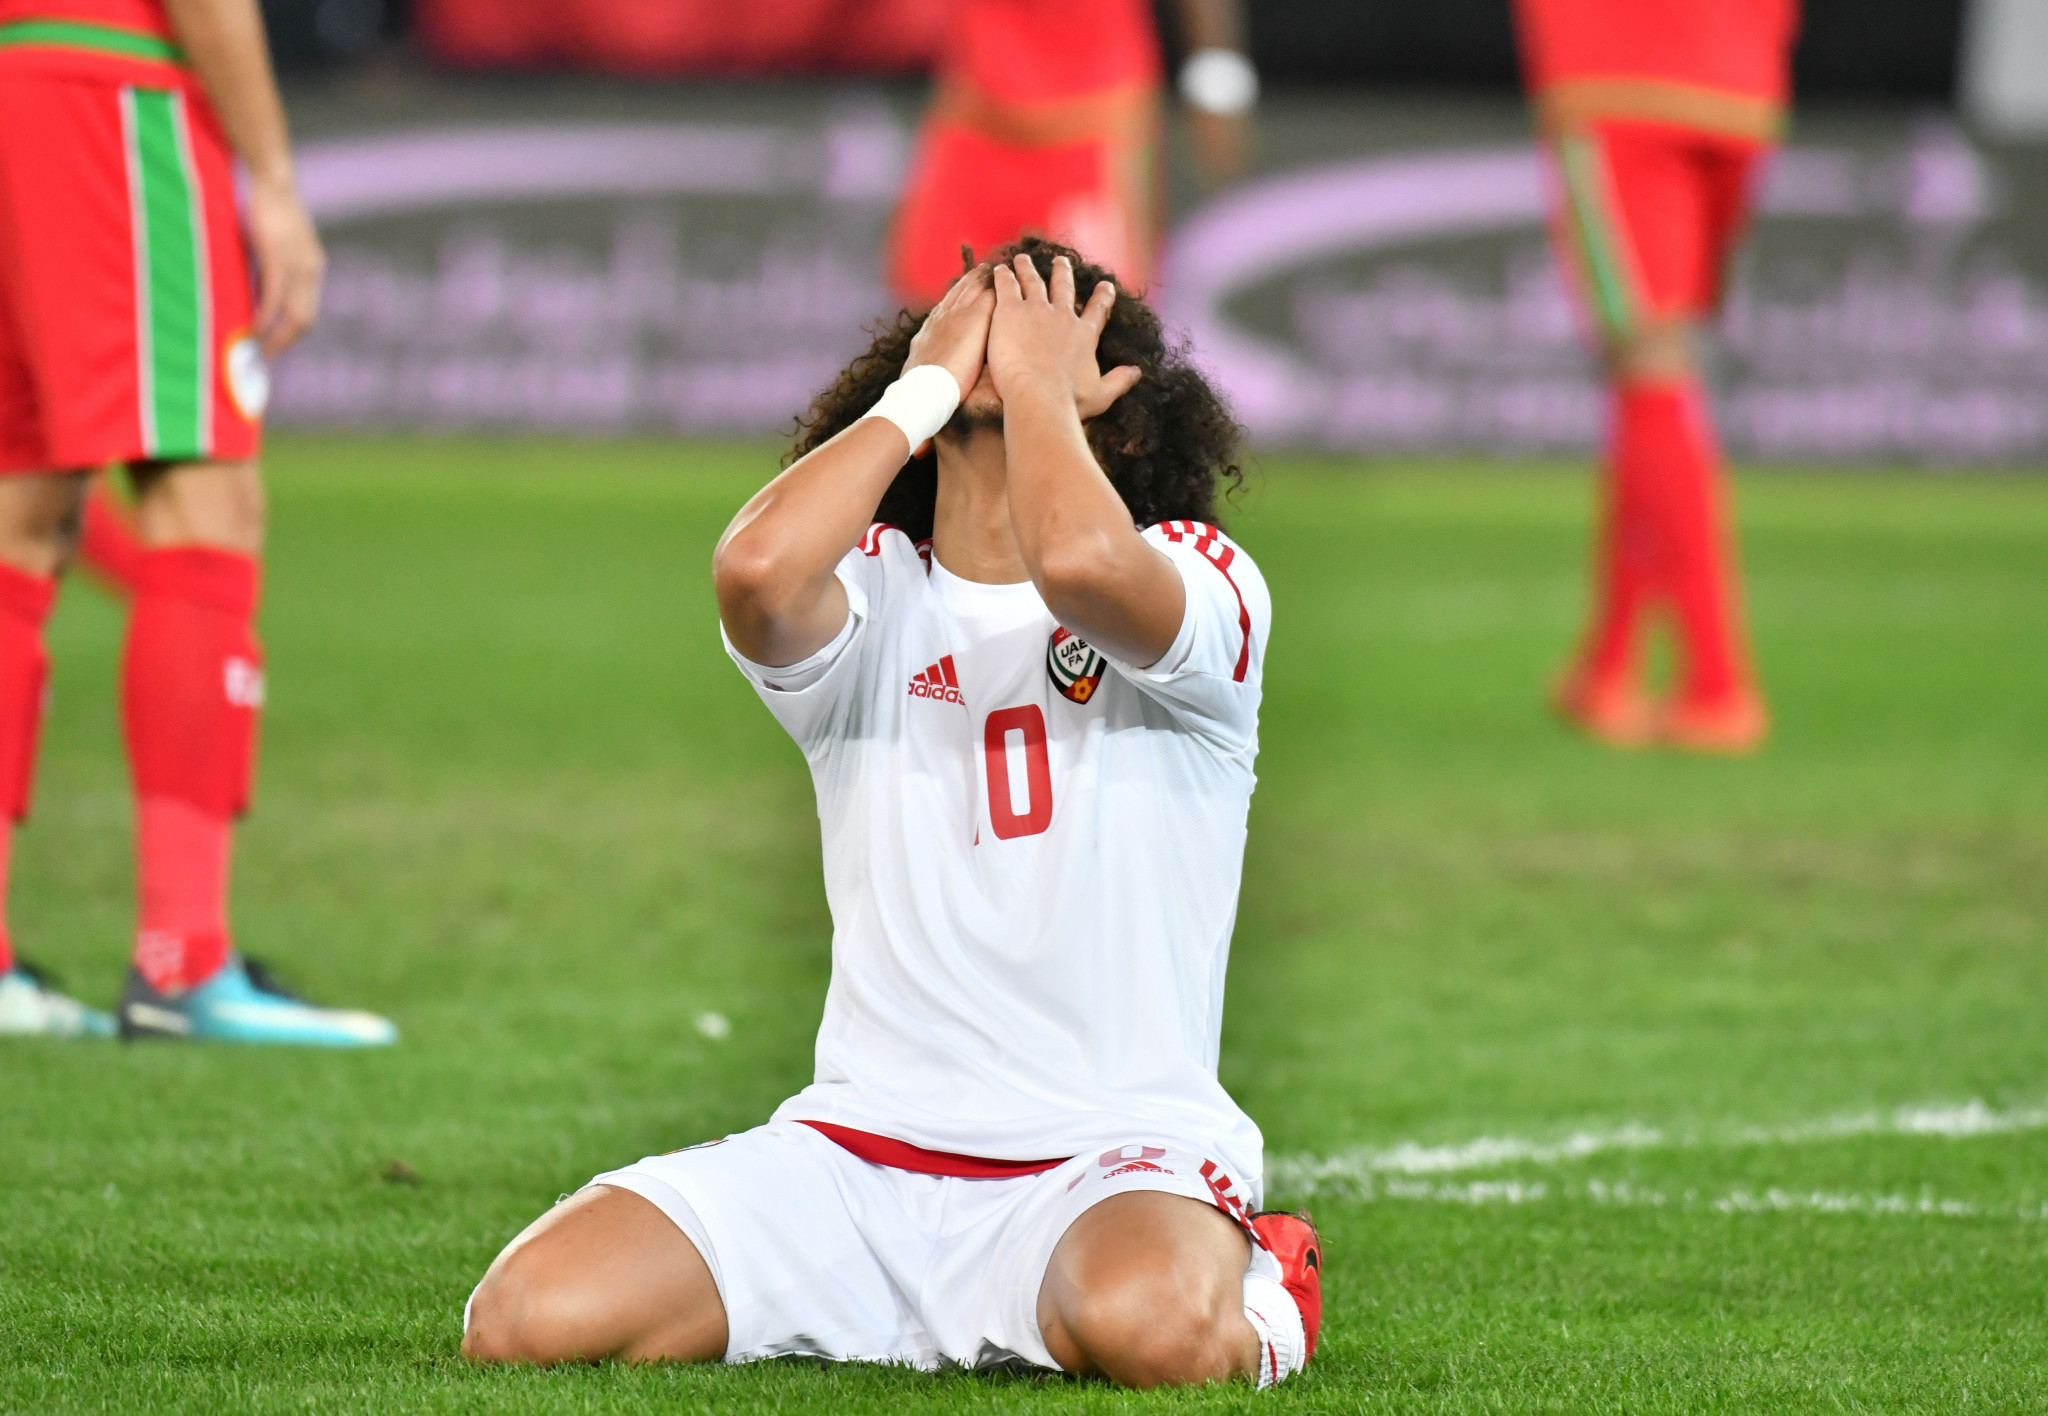 Omar Abdulrahman missed two penalties in the Gulf Cup of Nations final ©Getty Images